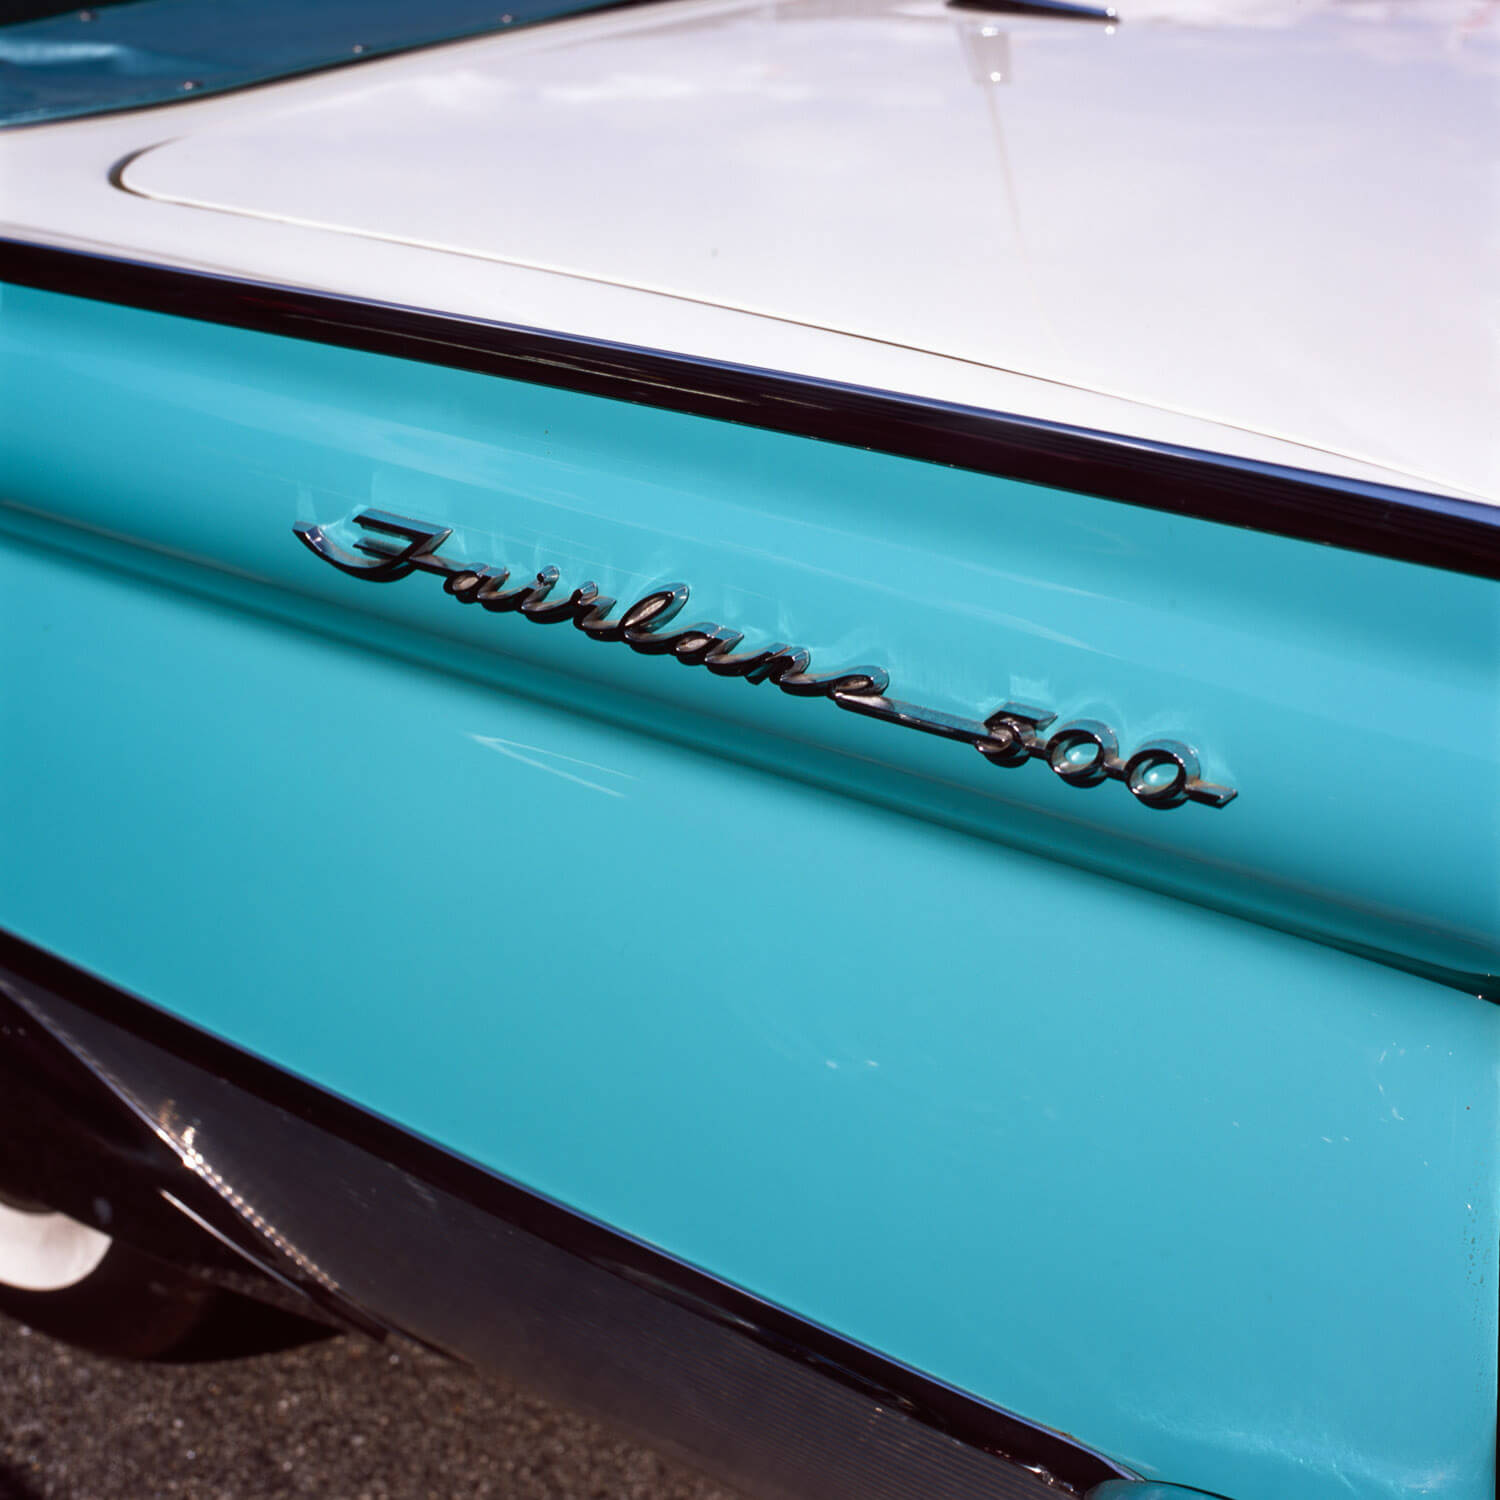 Ford Fairlane - The square format allows for enough detail at the top and bottom to identify the subject as an automobile. Shot with a Hasselblad 500CM on Ektachrome film